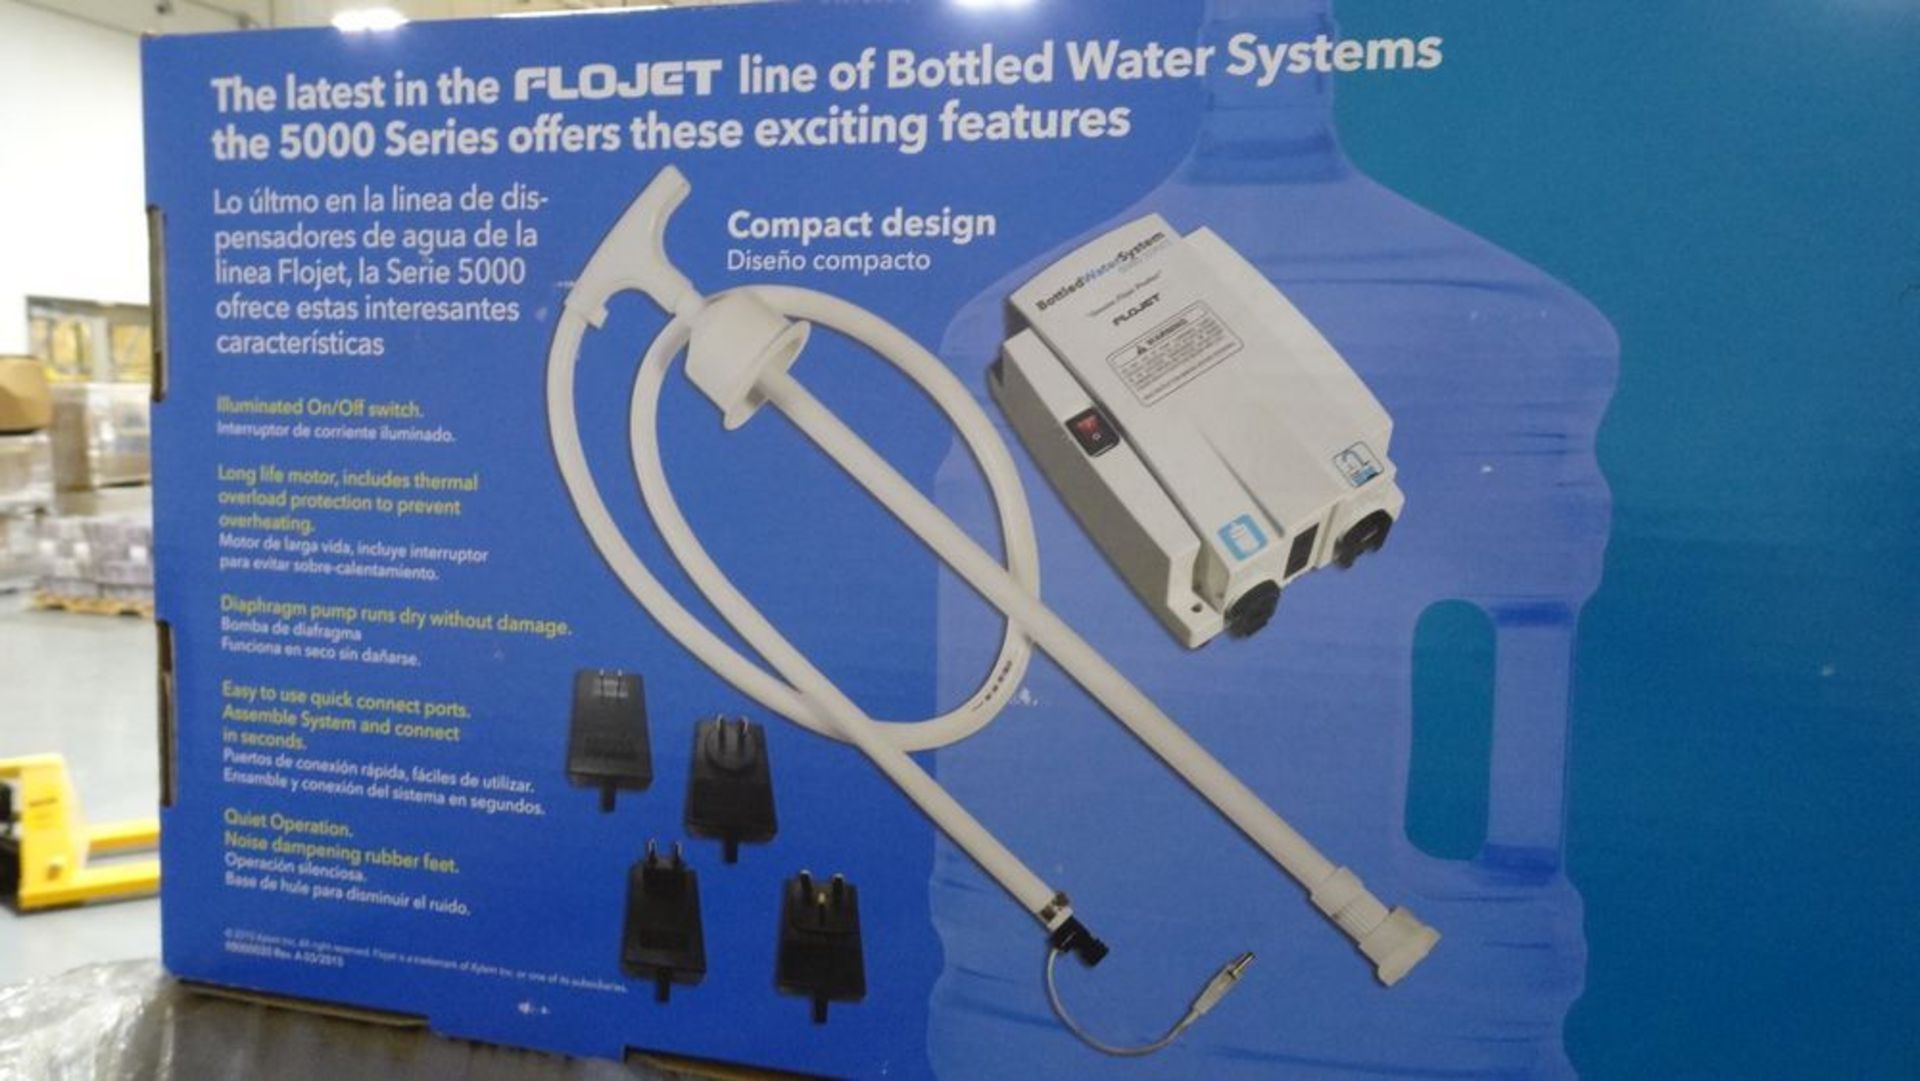 XYLEM FLOJET W5005-000A BOTTLED WATER SYSTEMS (REUTER) - Image 4 of 5